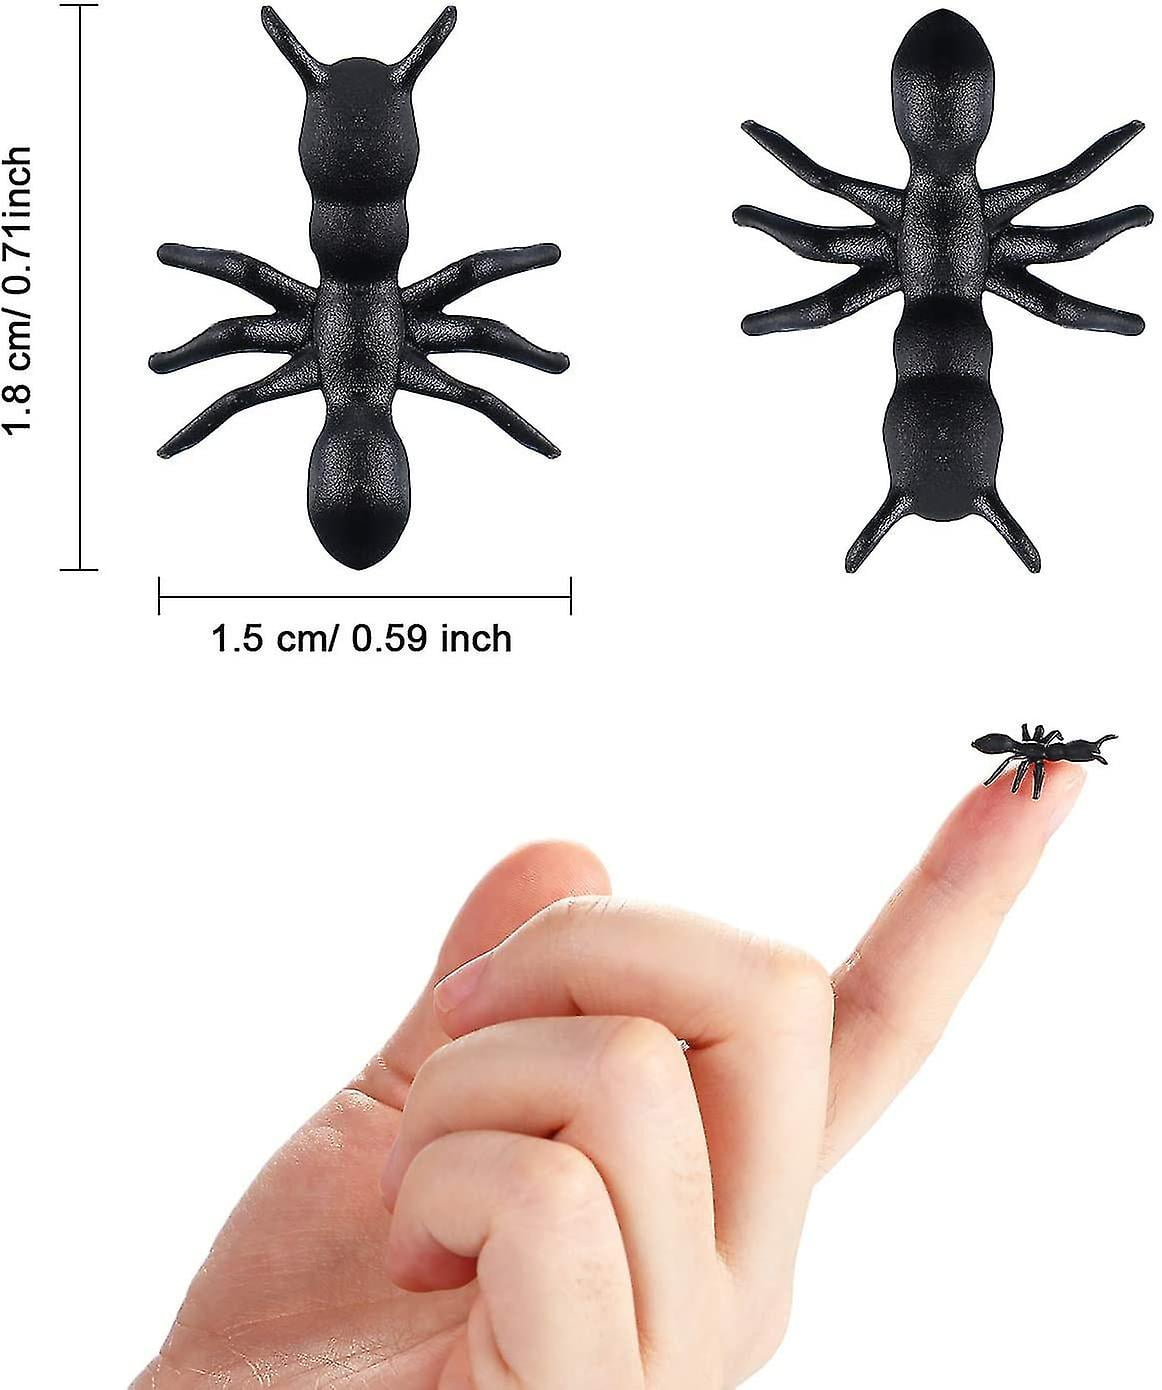 300 Pieces Fake Ants Prank Plastic Black Ant Bugs Joke Toys Realistic Insects for Halloween Party Favors Decoration Props 